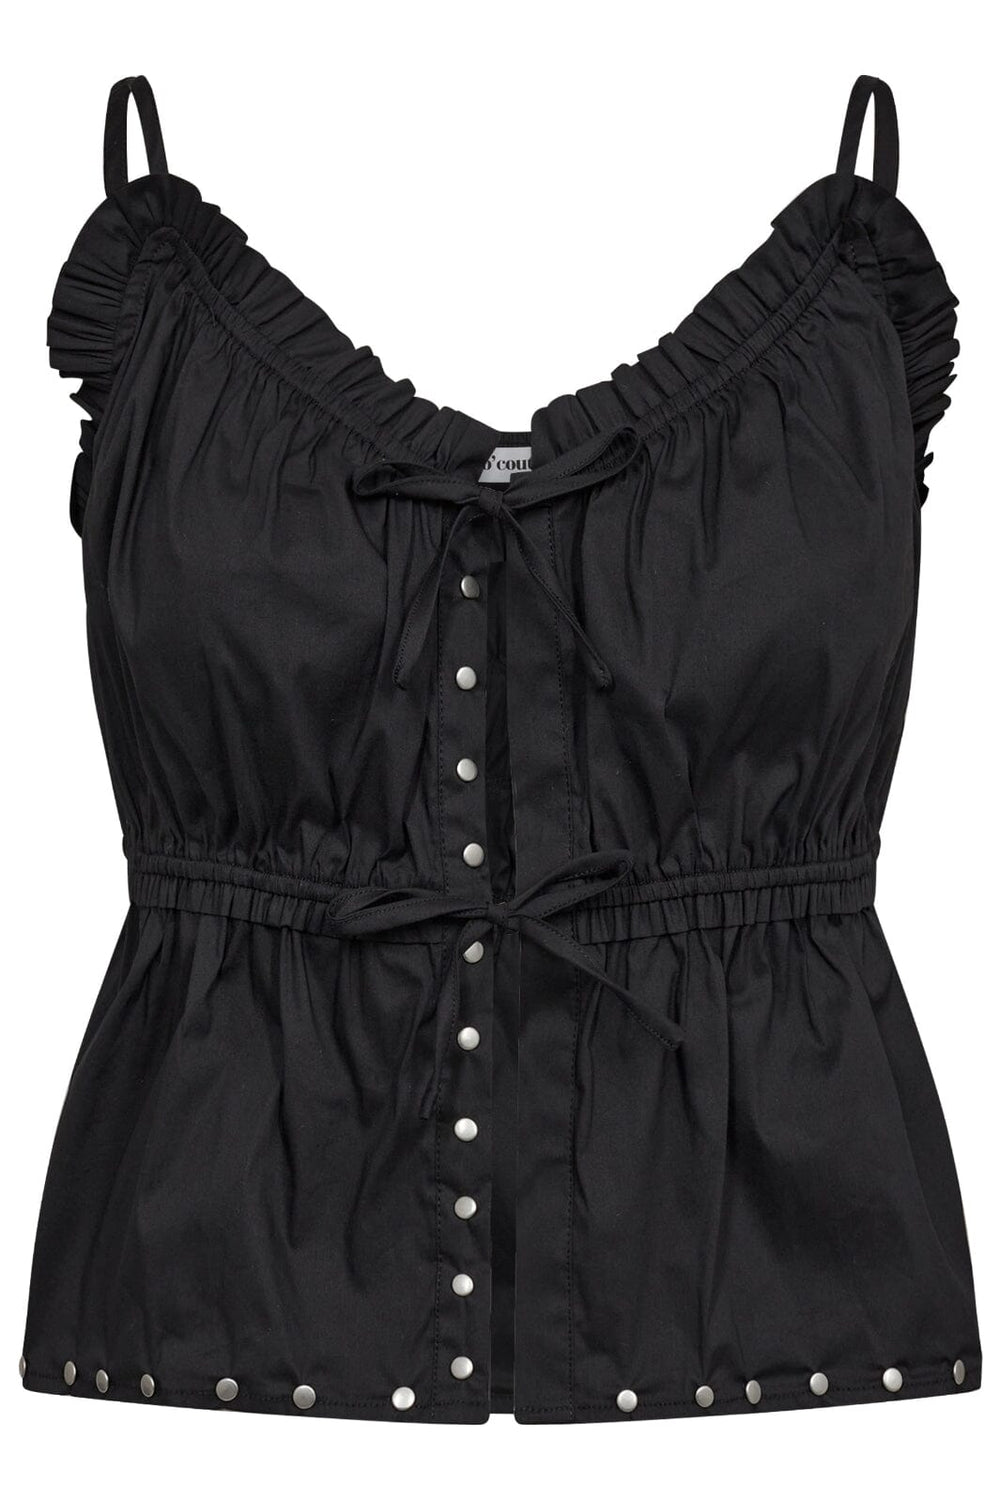 Co´couture - Annahcc Frill Tie Top 35458 - 96 Black Toppe 